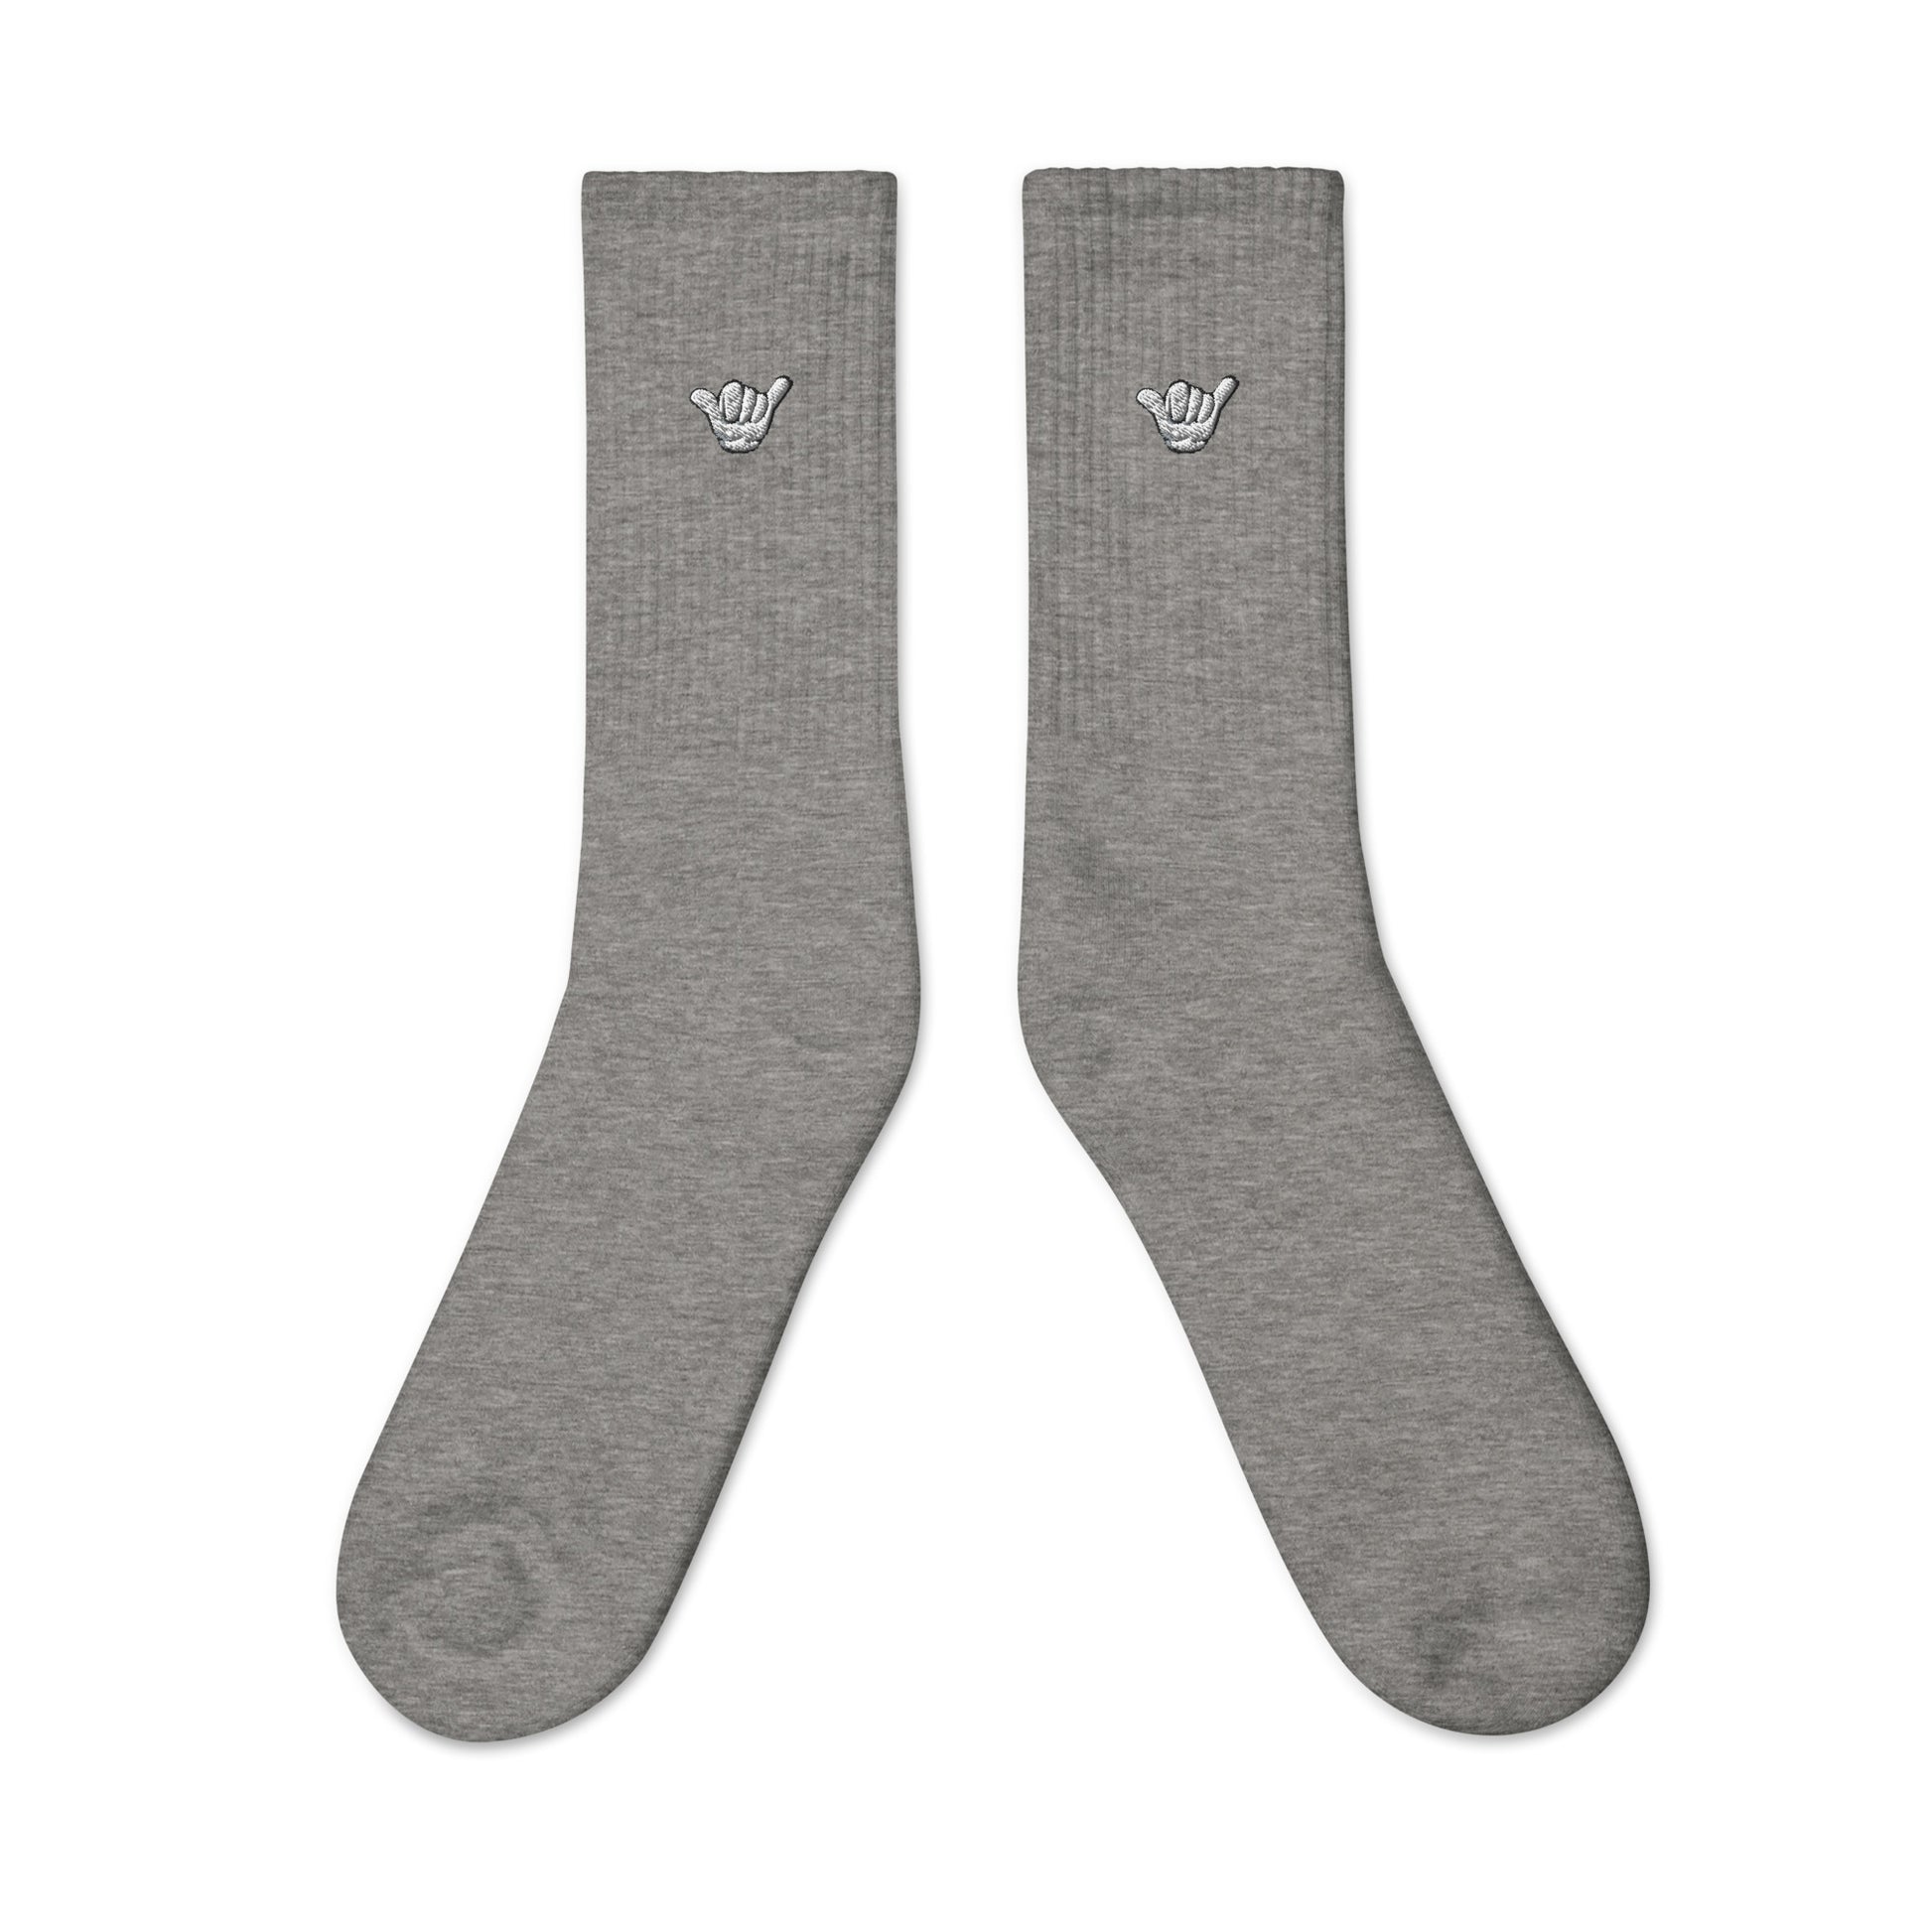 socks-from-the-front-with-cartoon-symbol